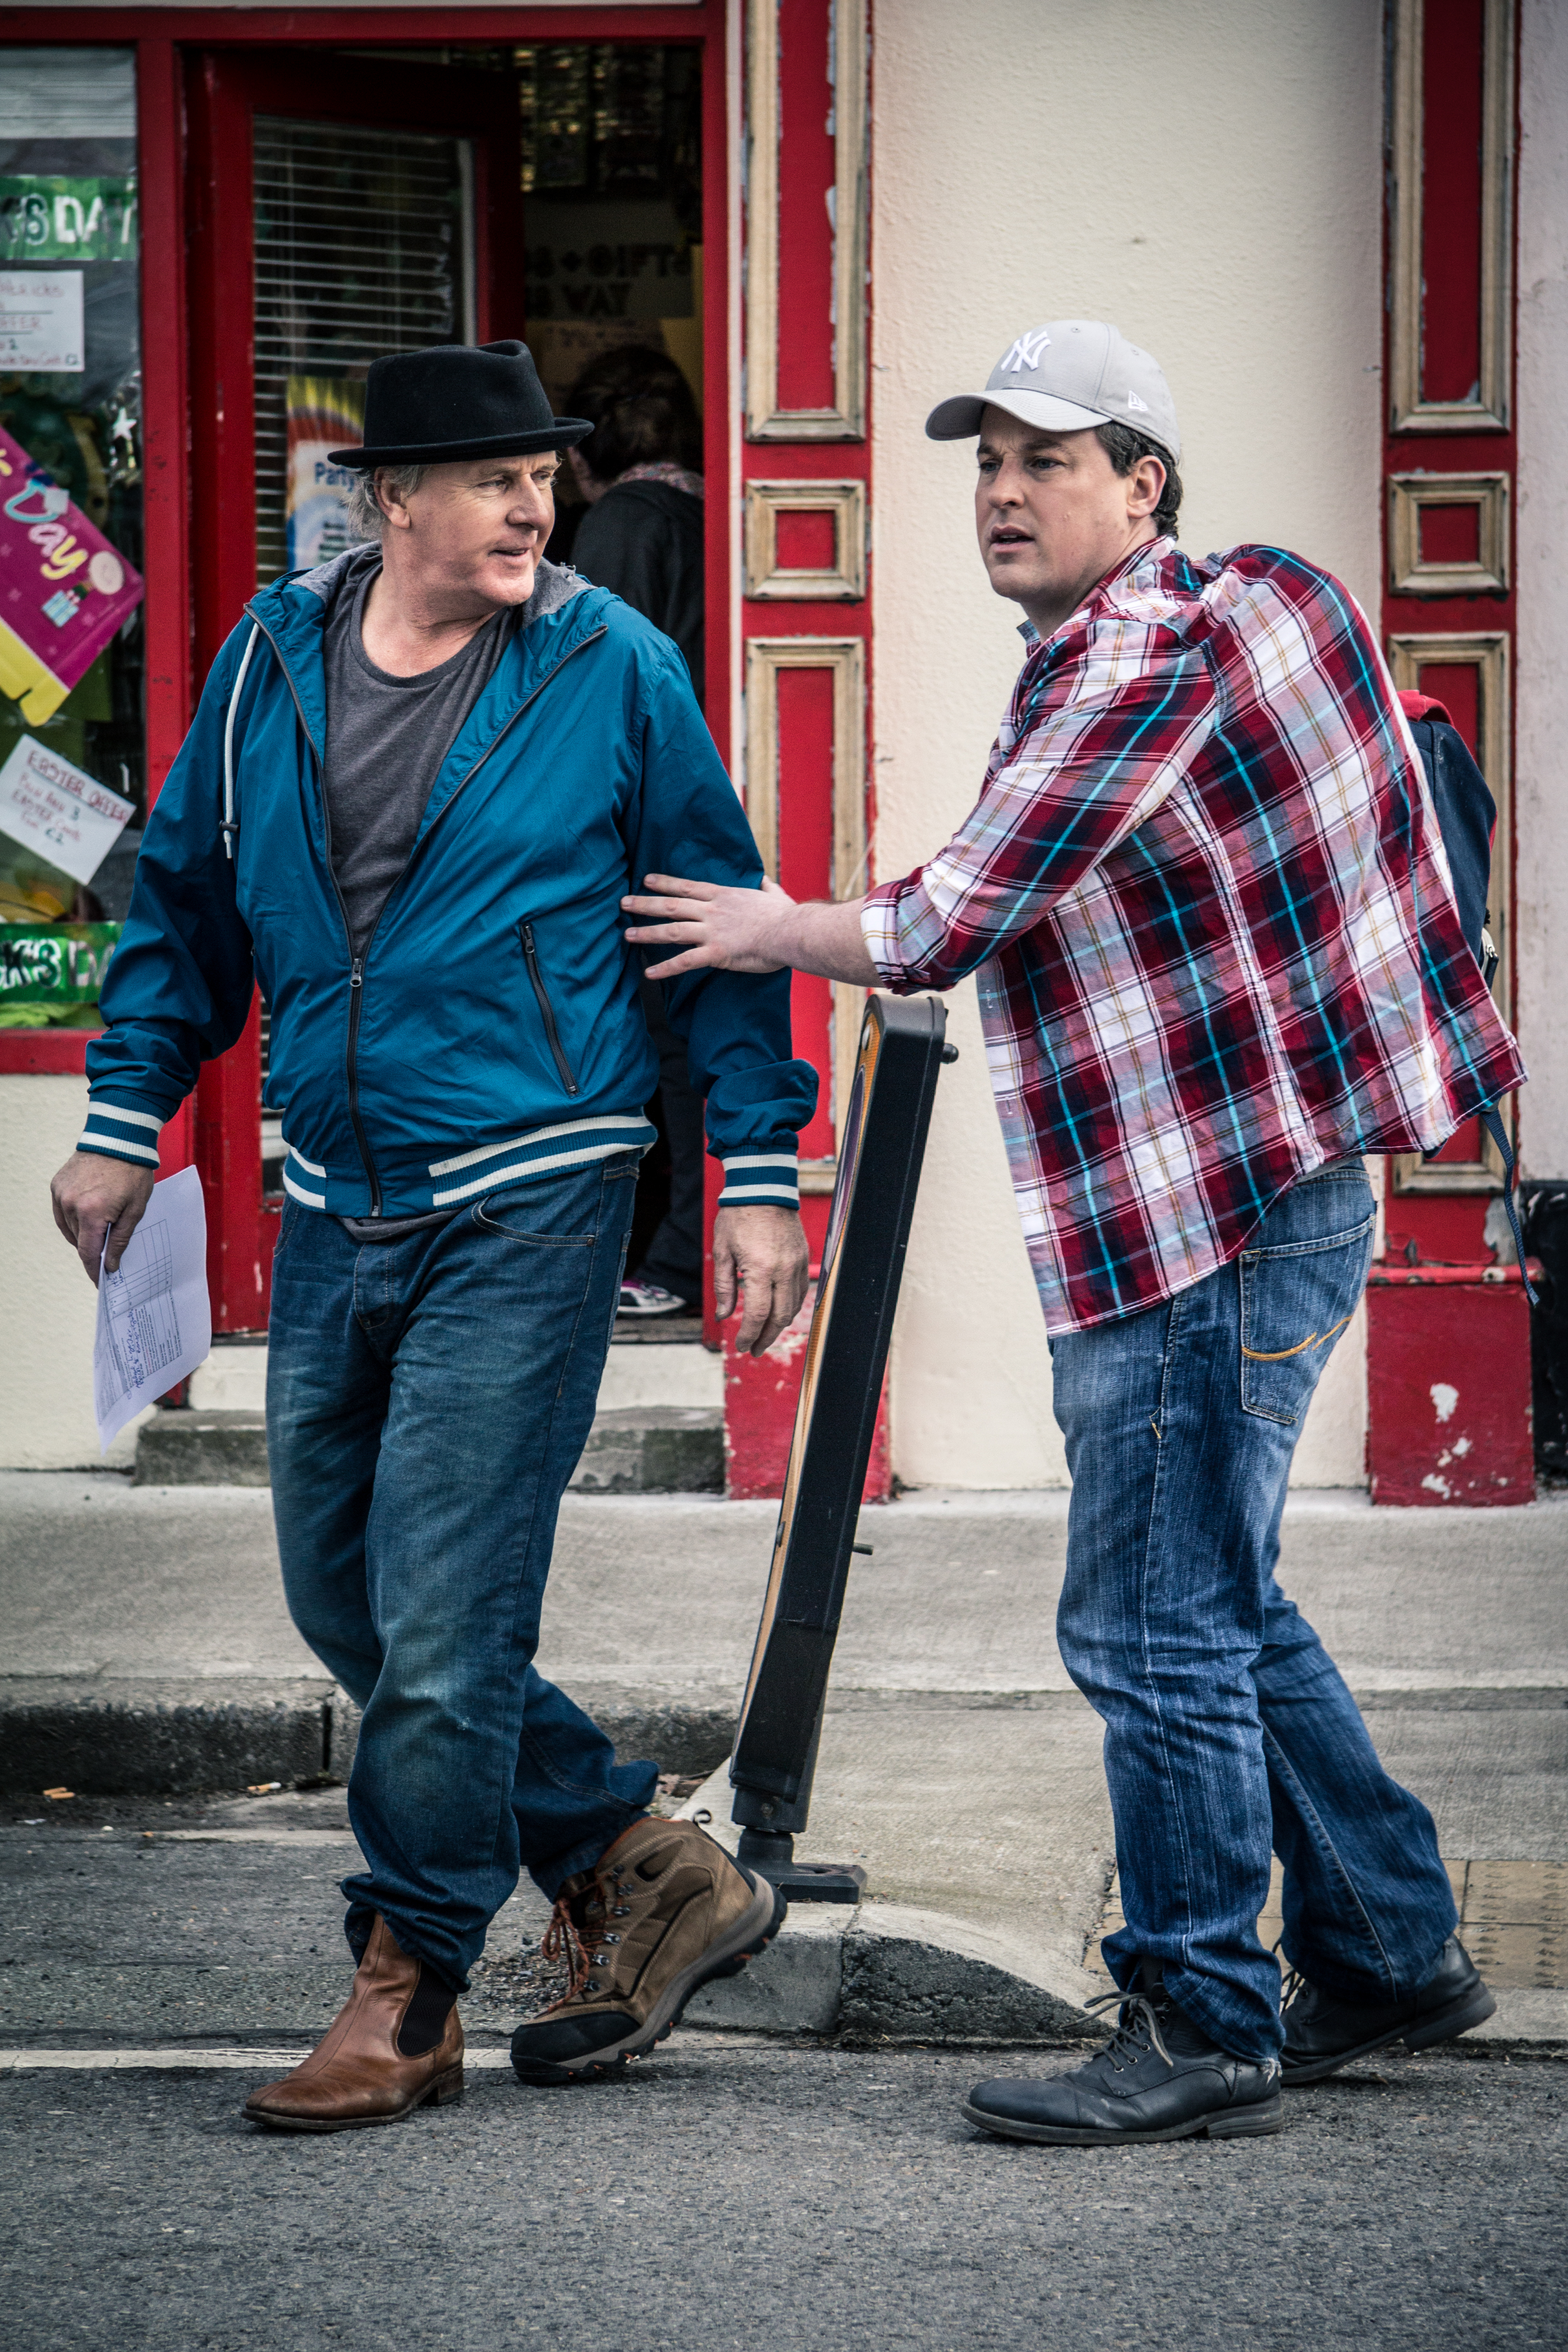 Limp (Brian Walsh) and Bailey (Declan Reynolds) in a scene from THE GAELIC CURSE (March 2015)